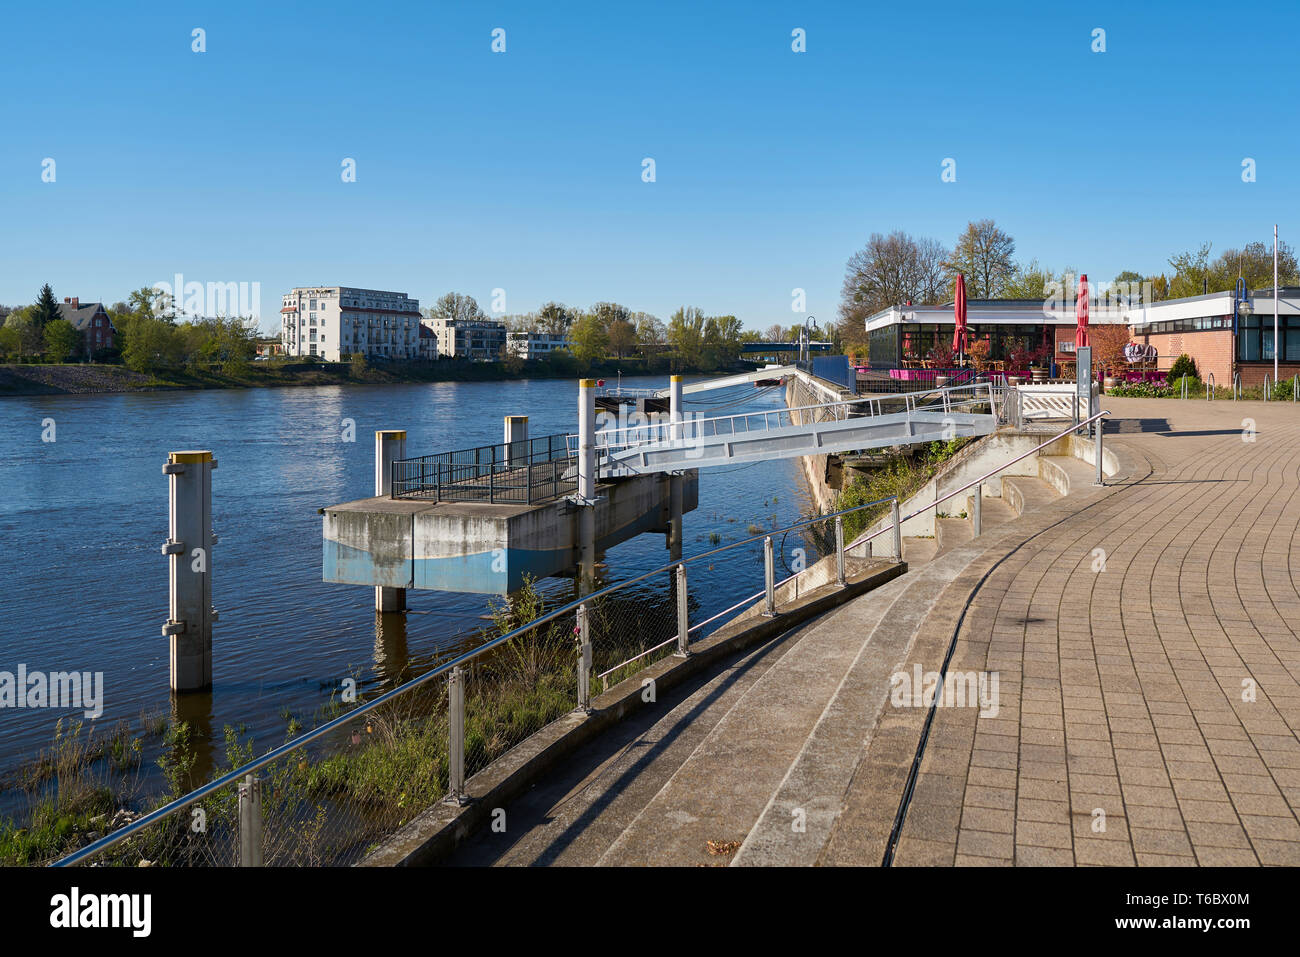 Waterfront promenade on the river Elbe in Magdeburg Stock Photo